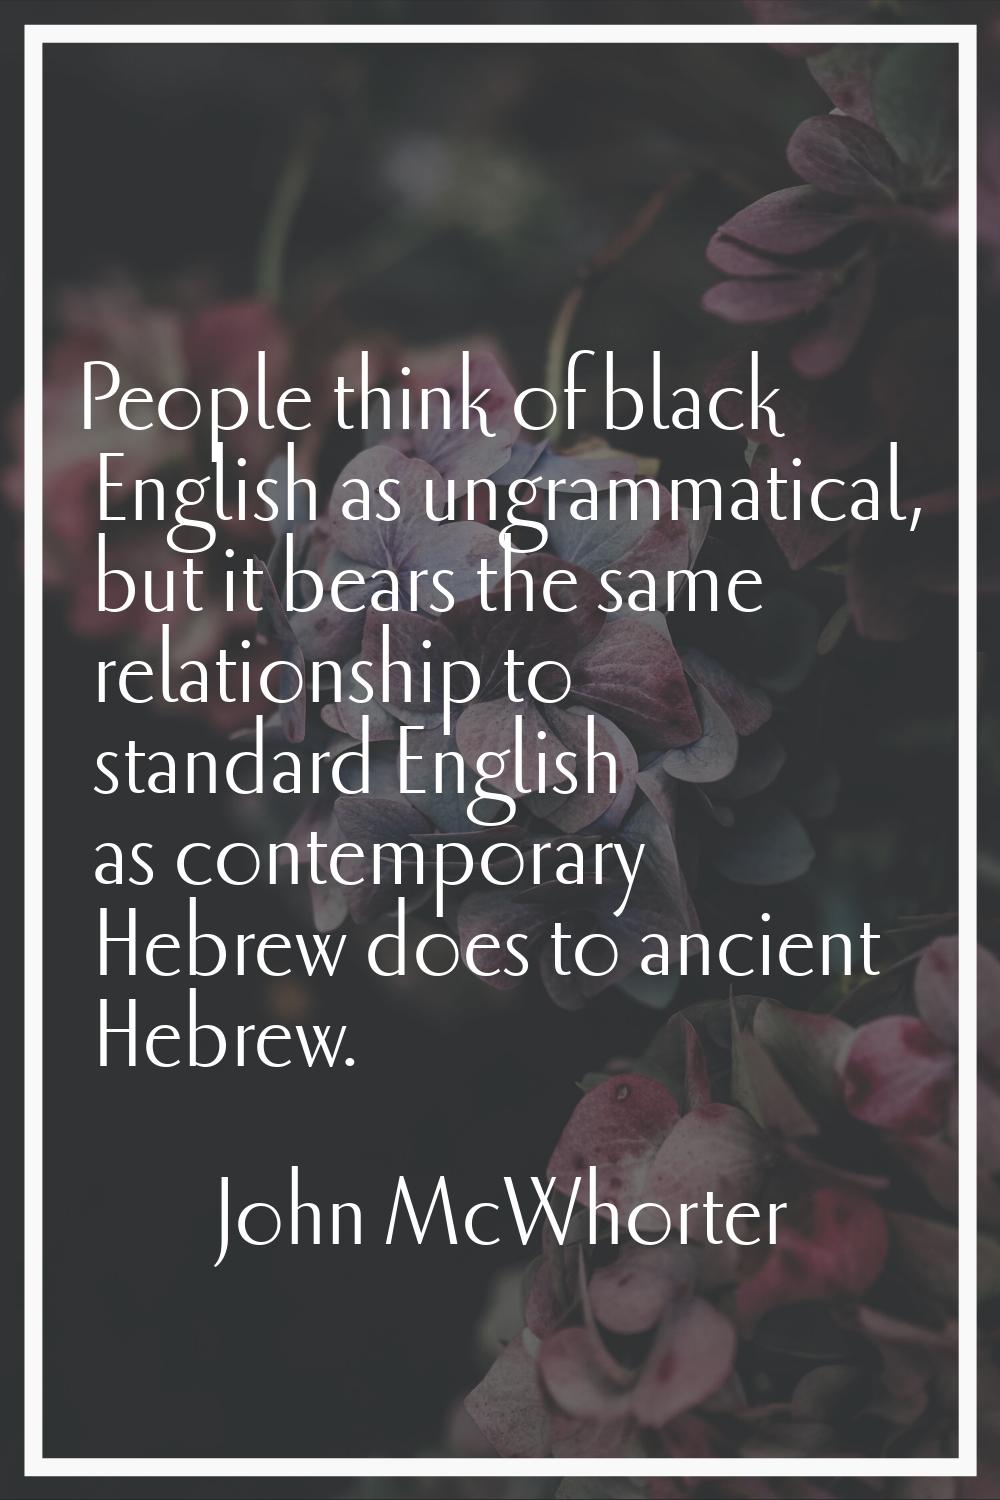 People think of black English as ungrammatical, but it bears the same relationship to standard Engl